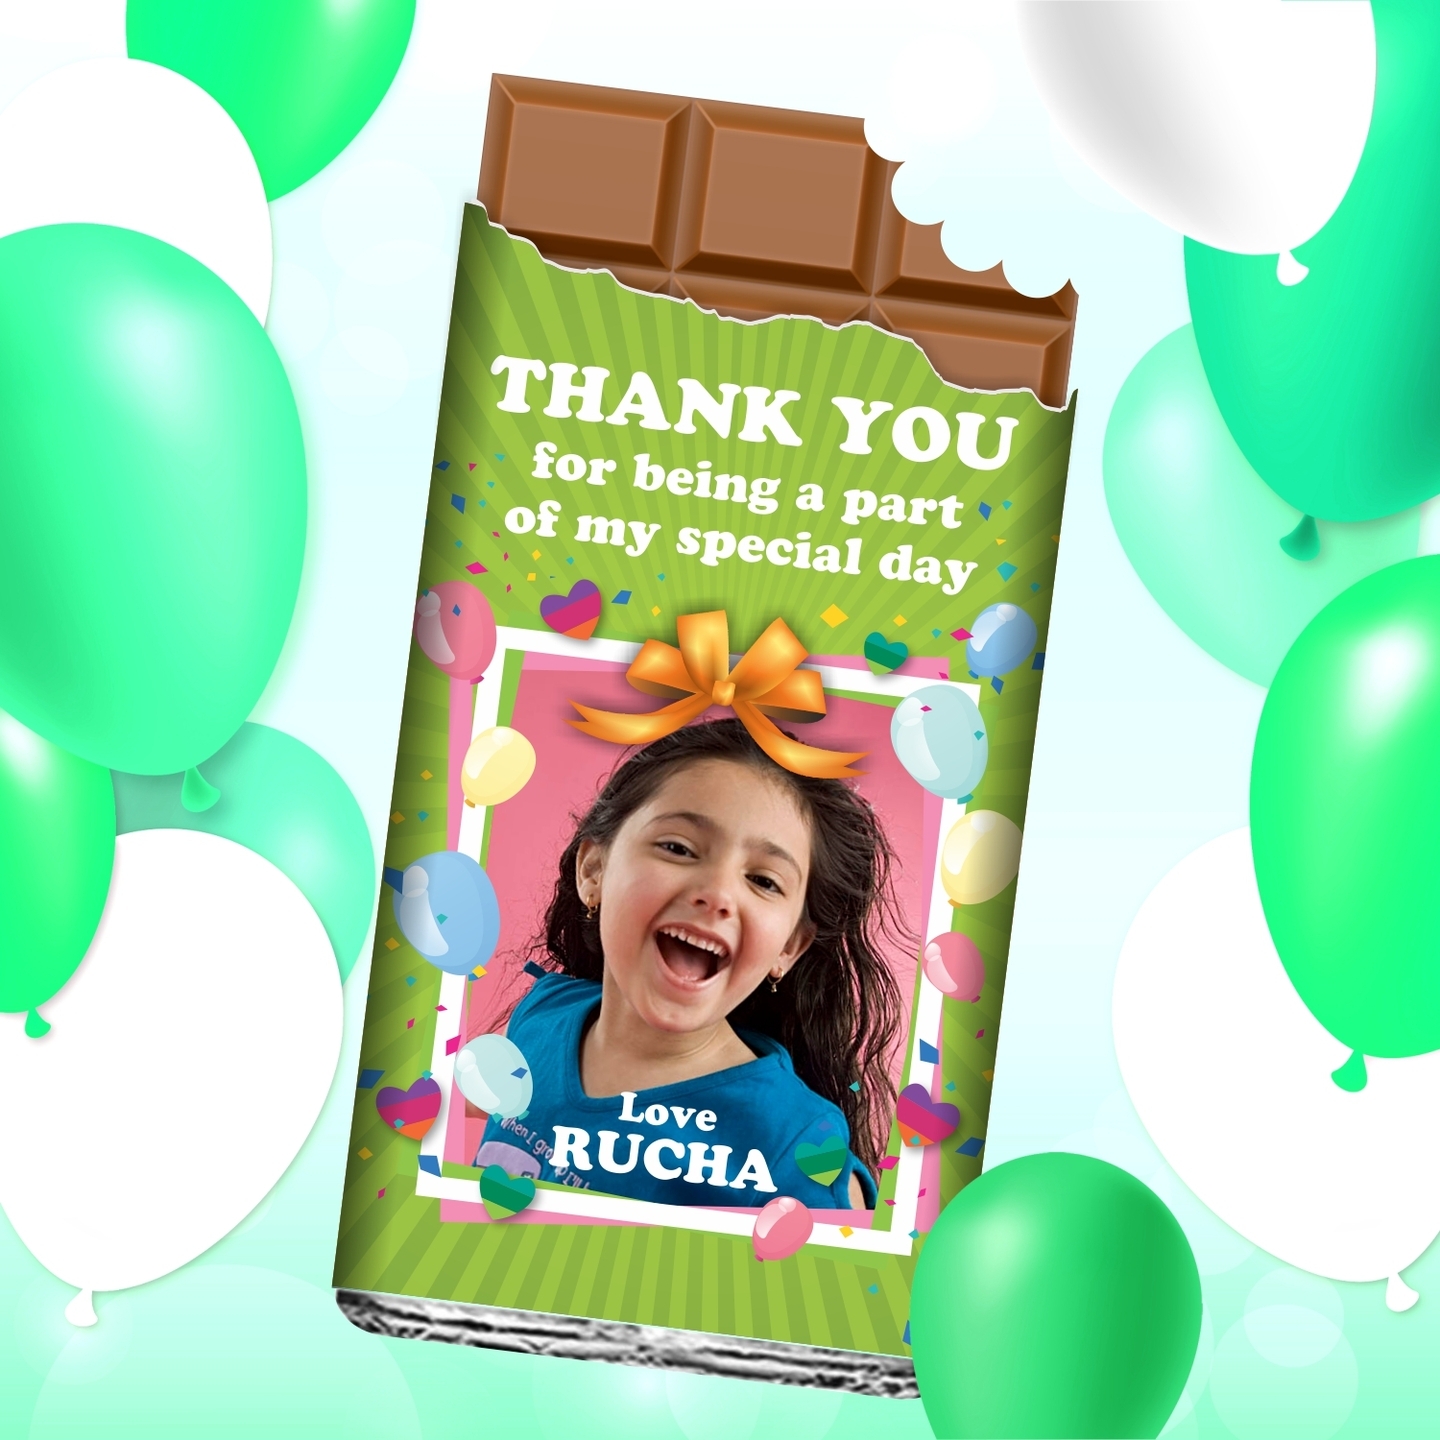 Birthday Return Gifts with Photo, Personalize Chocolates -15 Bars